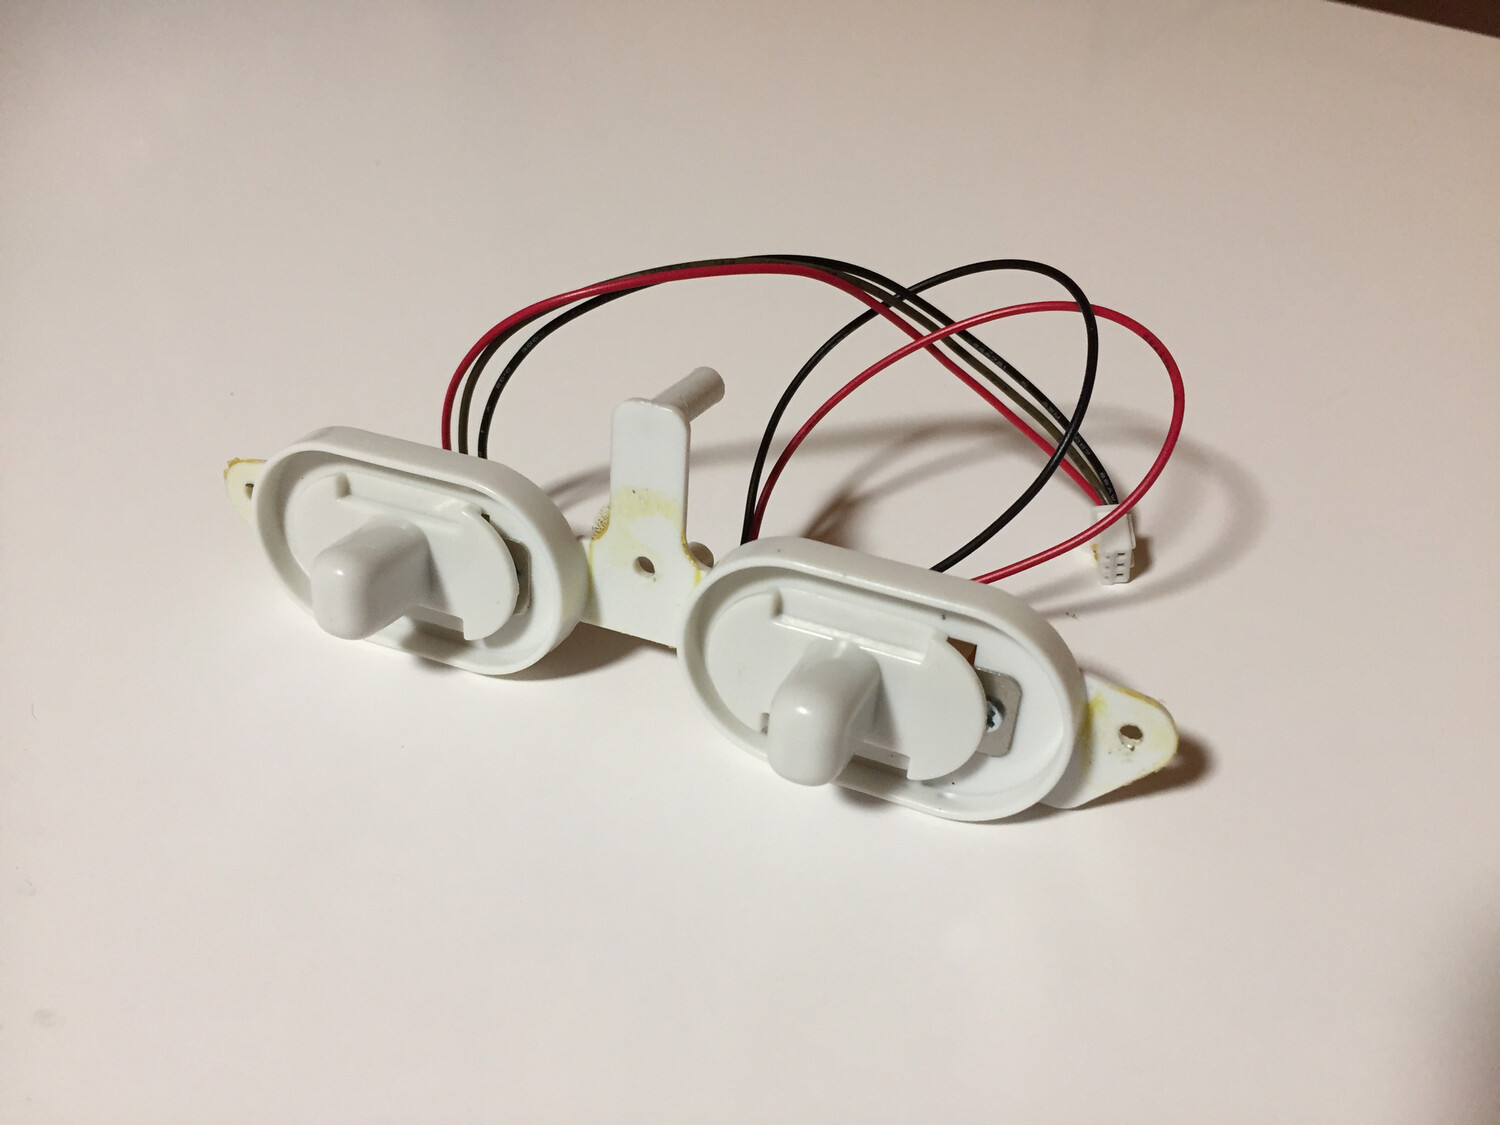 White Volume/ON/OFF switch - Arcade1UP OEM switch